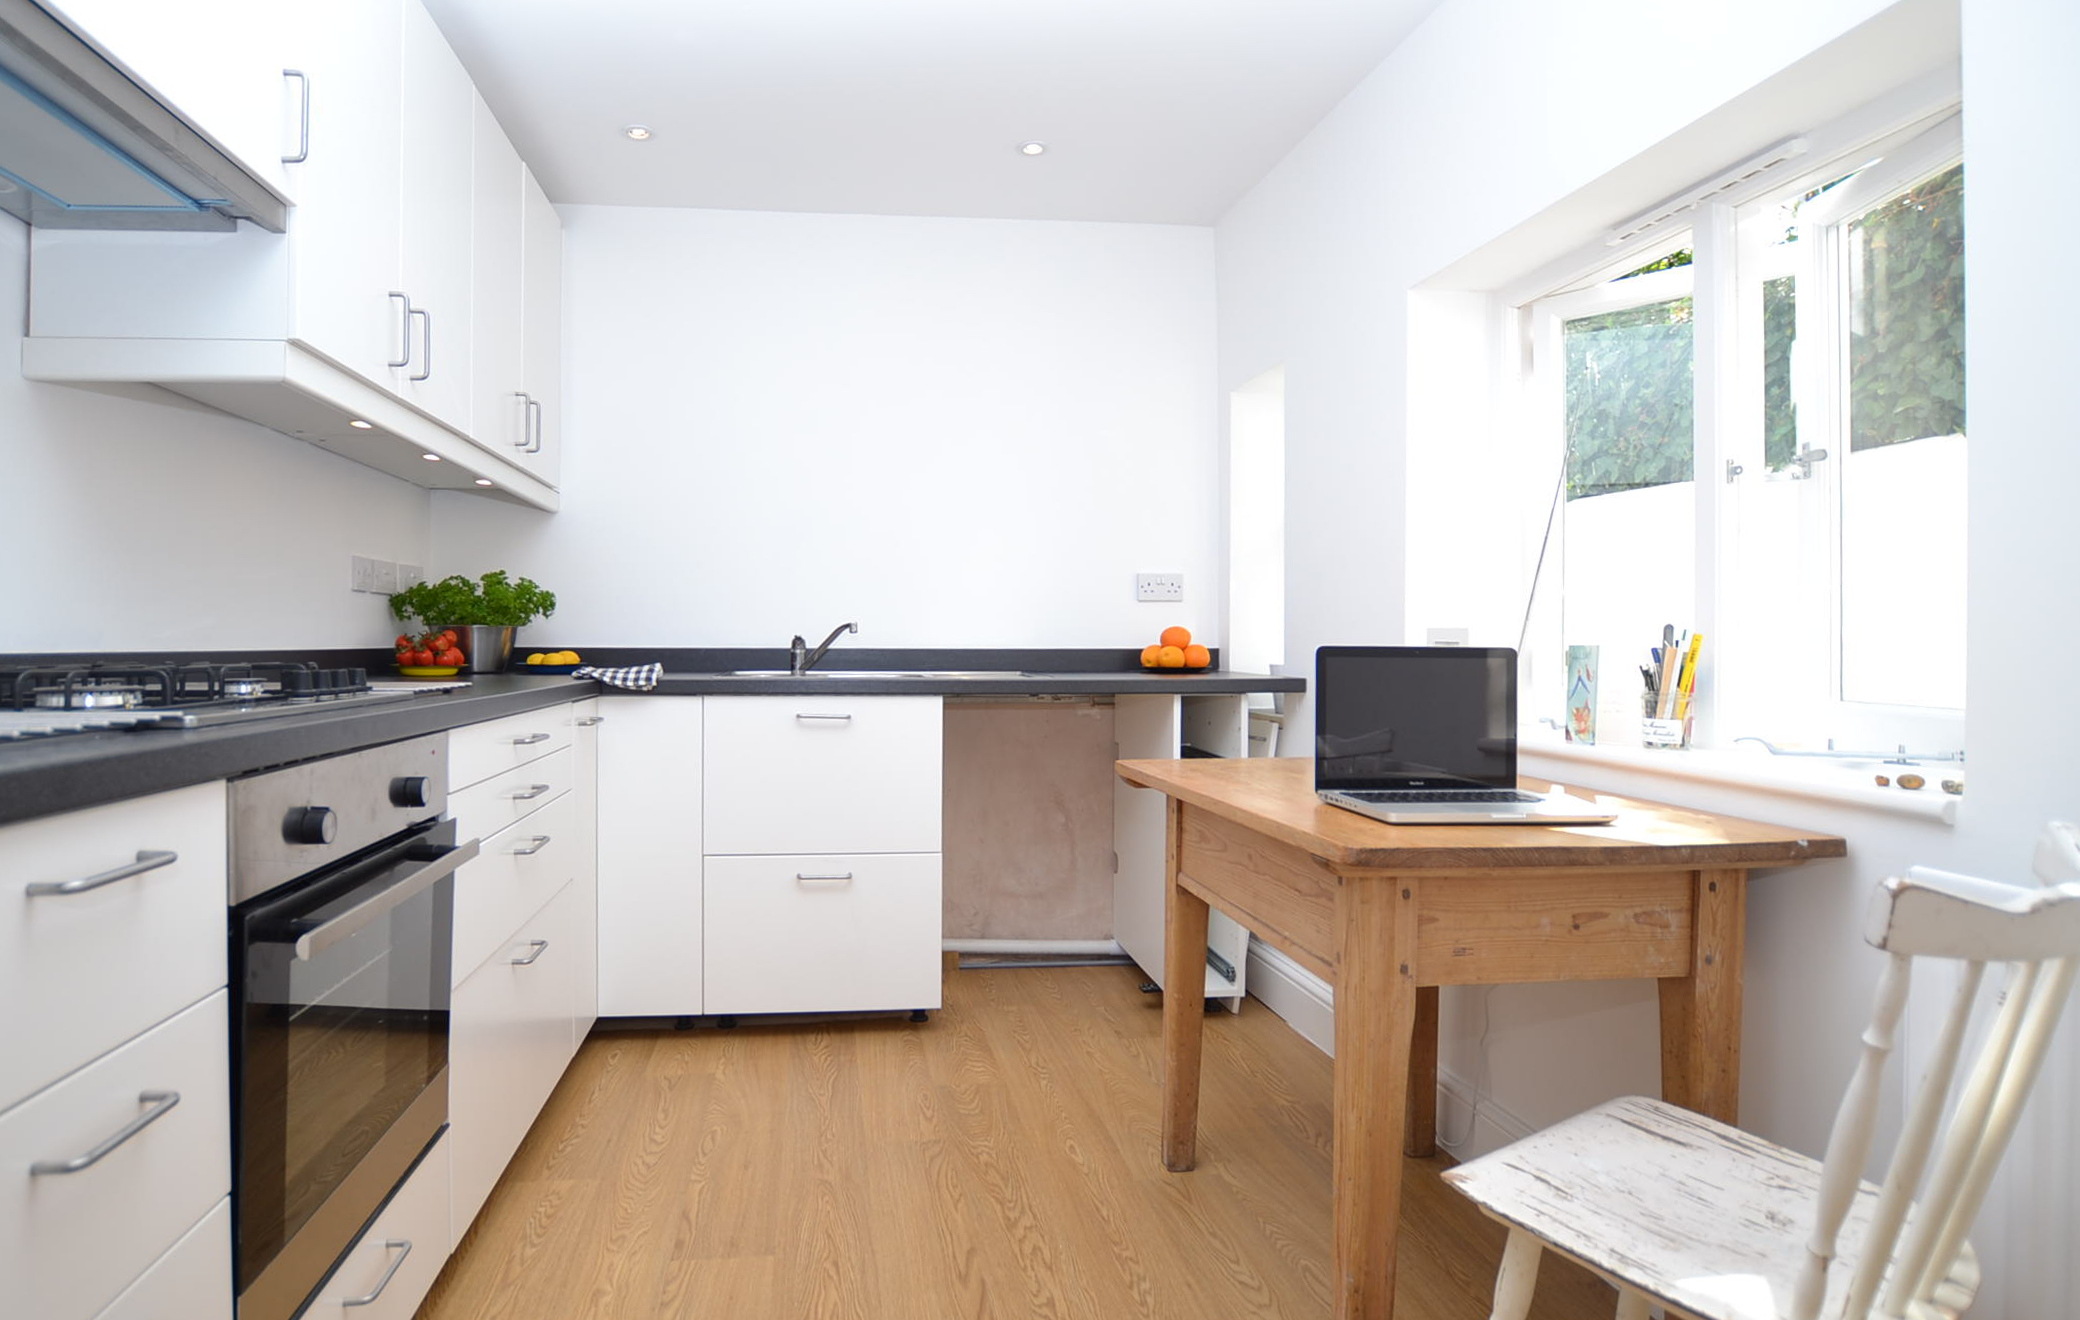 Parks Letting Property Kitchen in Brighton